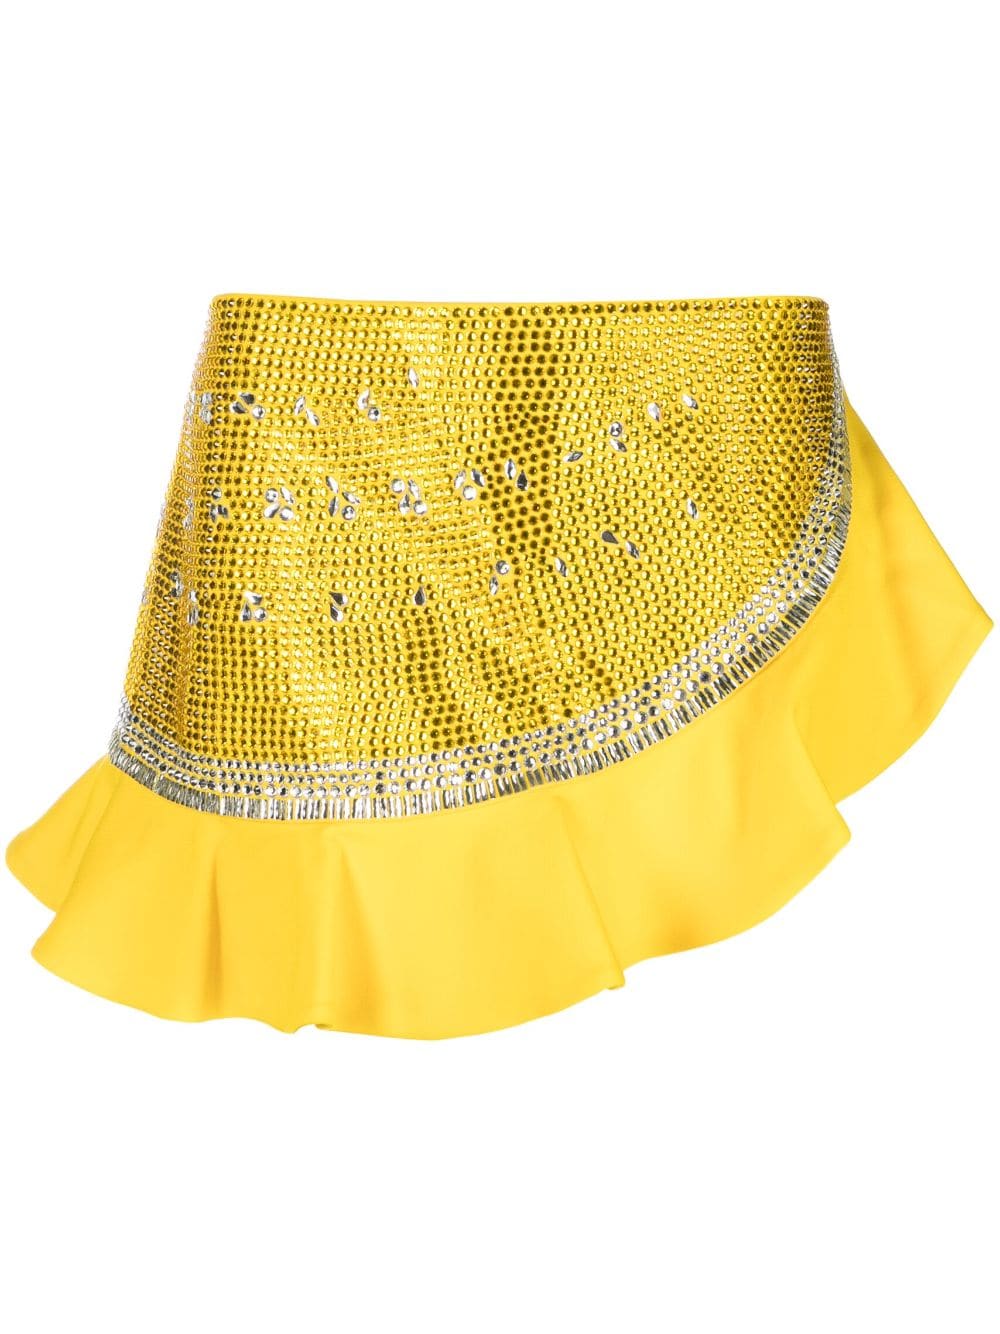 AREA Watermelon crystal-embellished ruffled skirt - Yellow von AREA